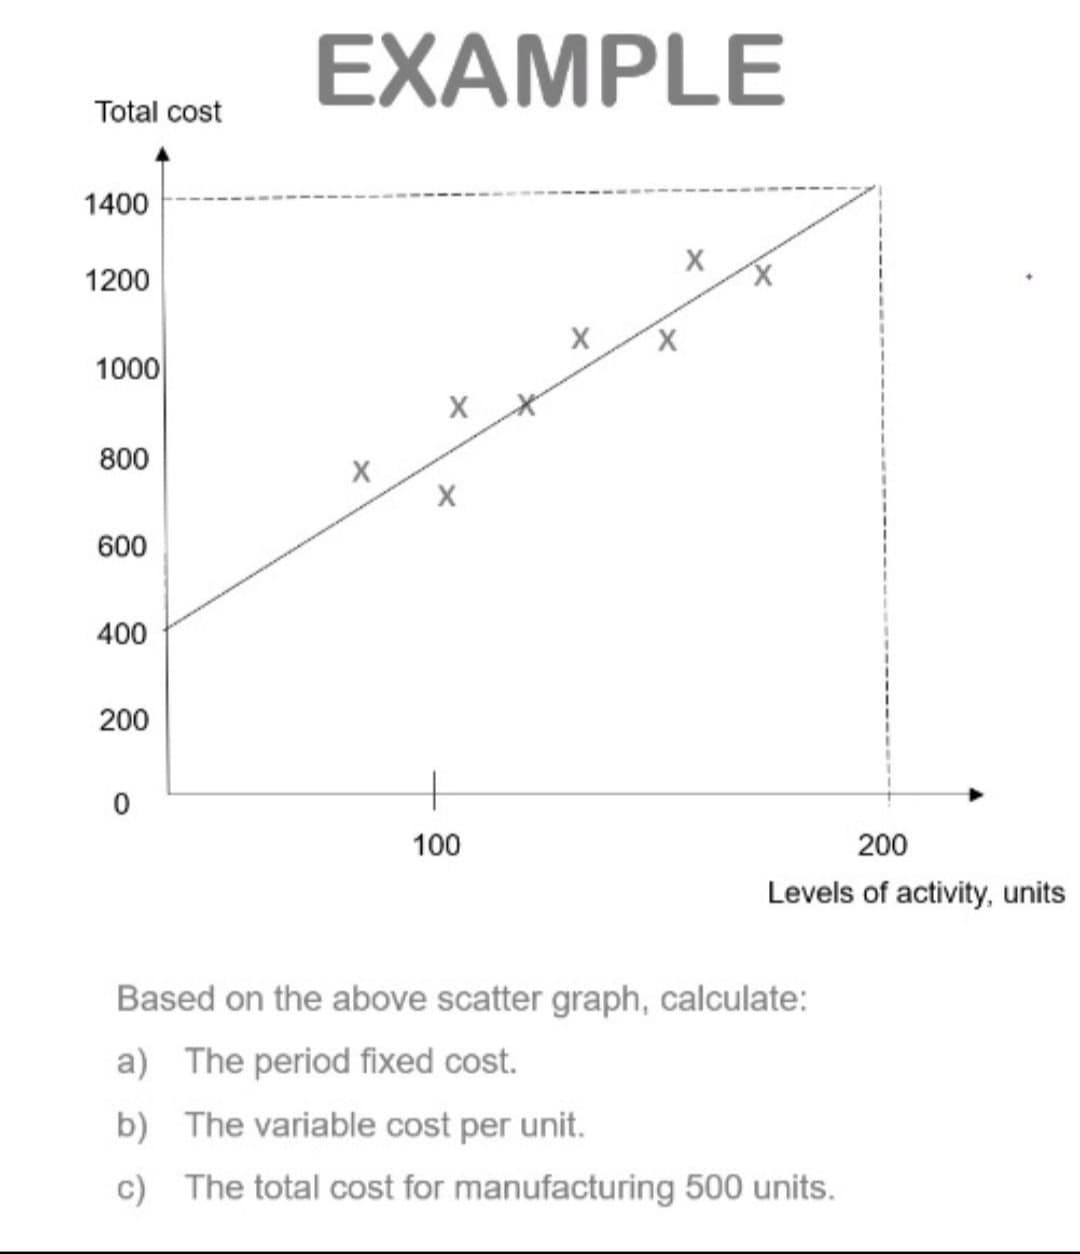 EXAMPLE
Total cost
1400
1200
1000
800
600
400
200
100
200
Levels of activity, units
Based on the above scatter graph, calculate:
a) The period fixed cost.
b) The variable cost per unit.
c) The total cost for manufacturing 500 units.
